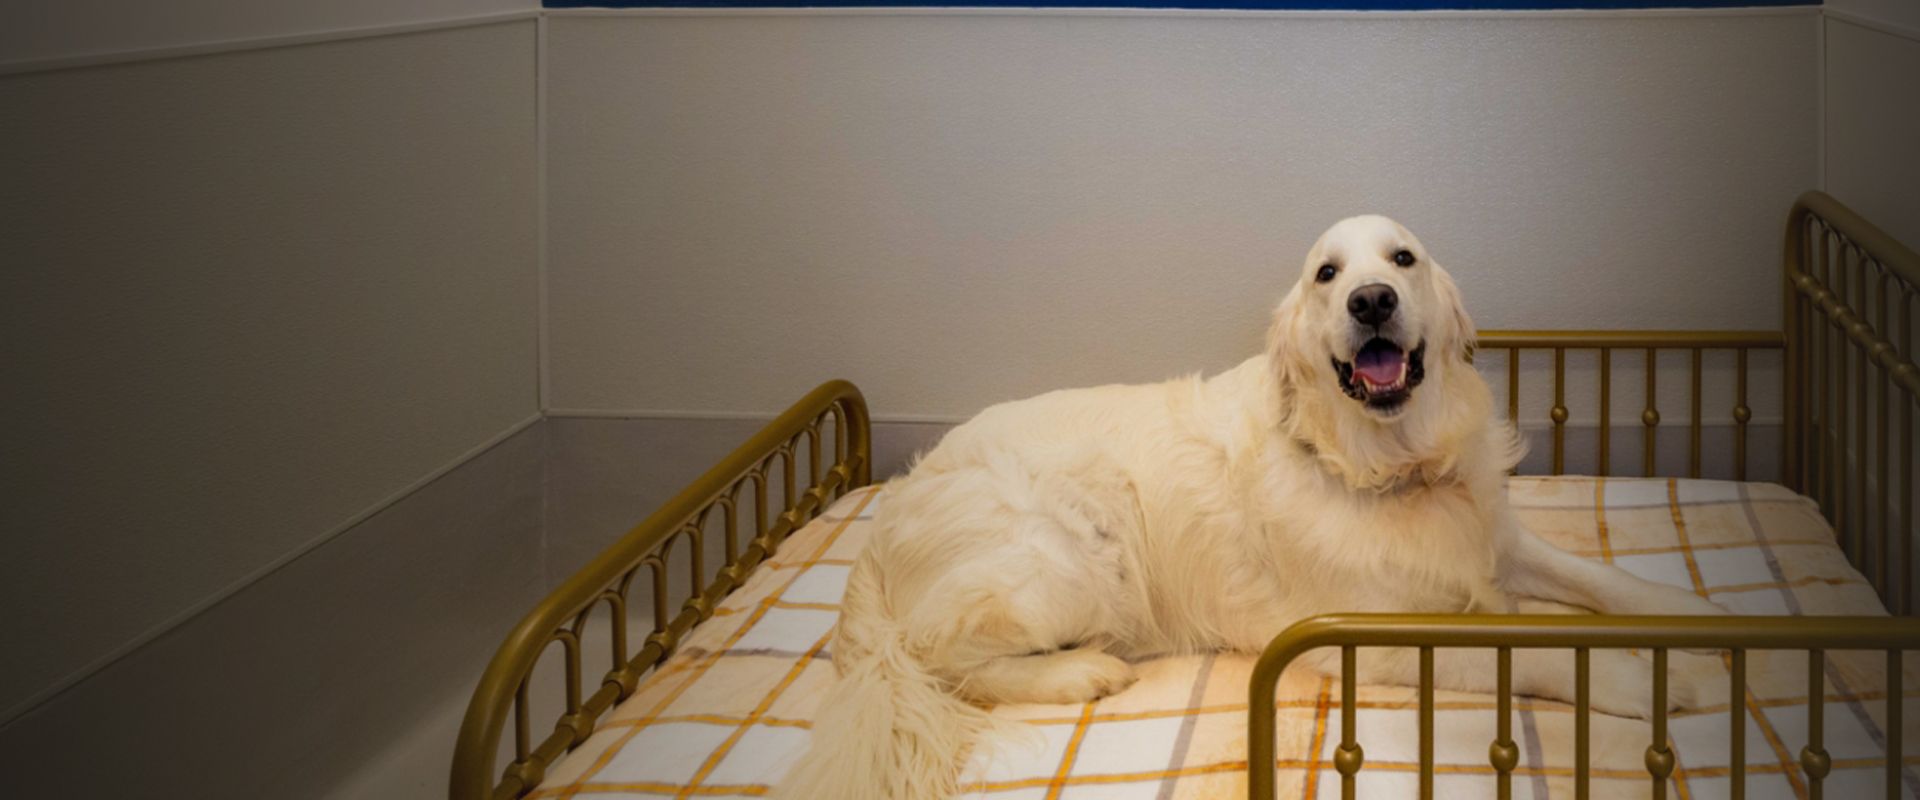 smiling golden retriever dog lying on a bed